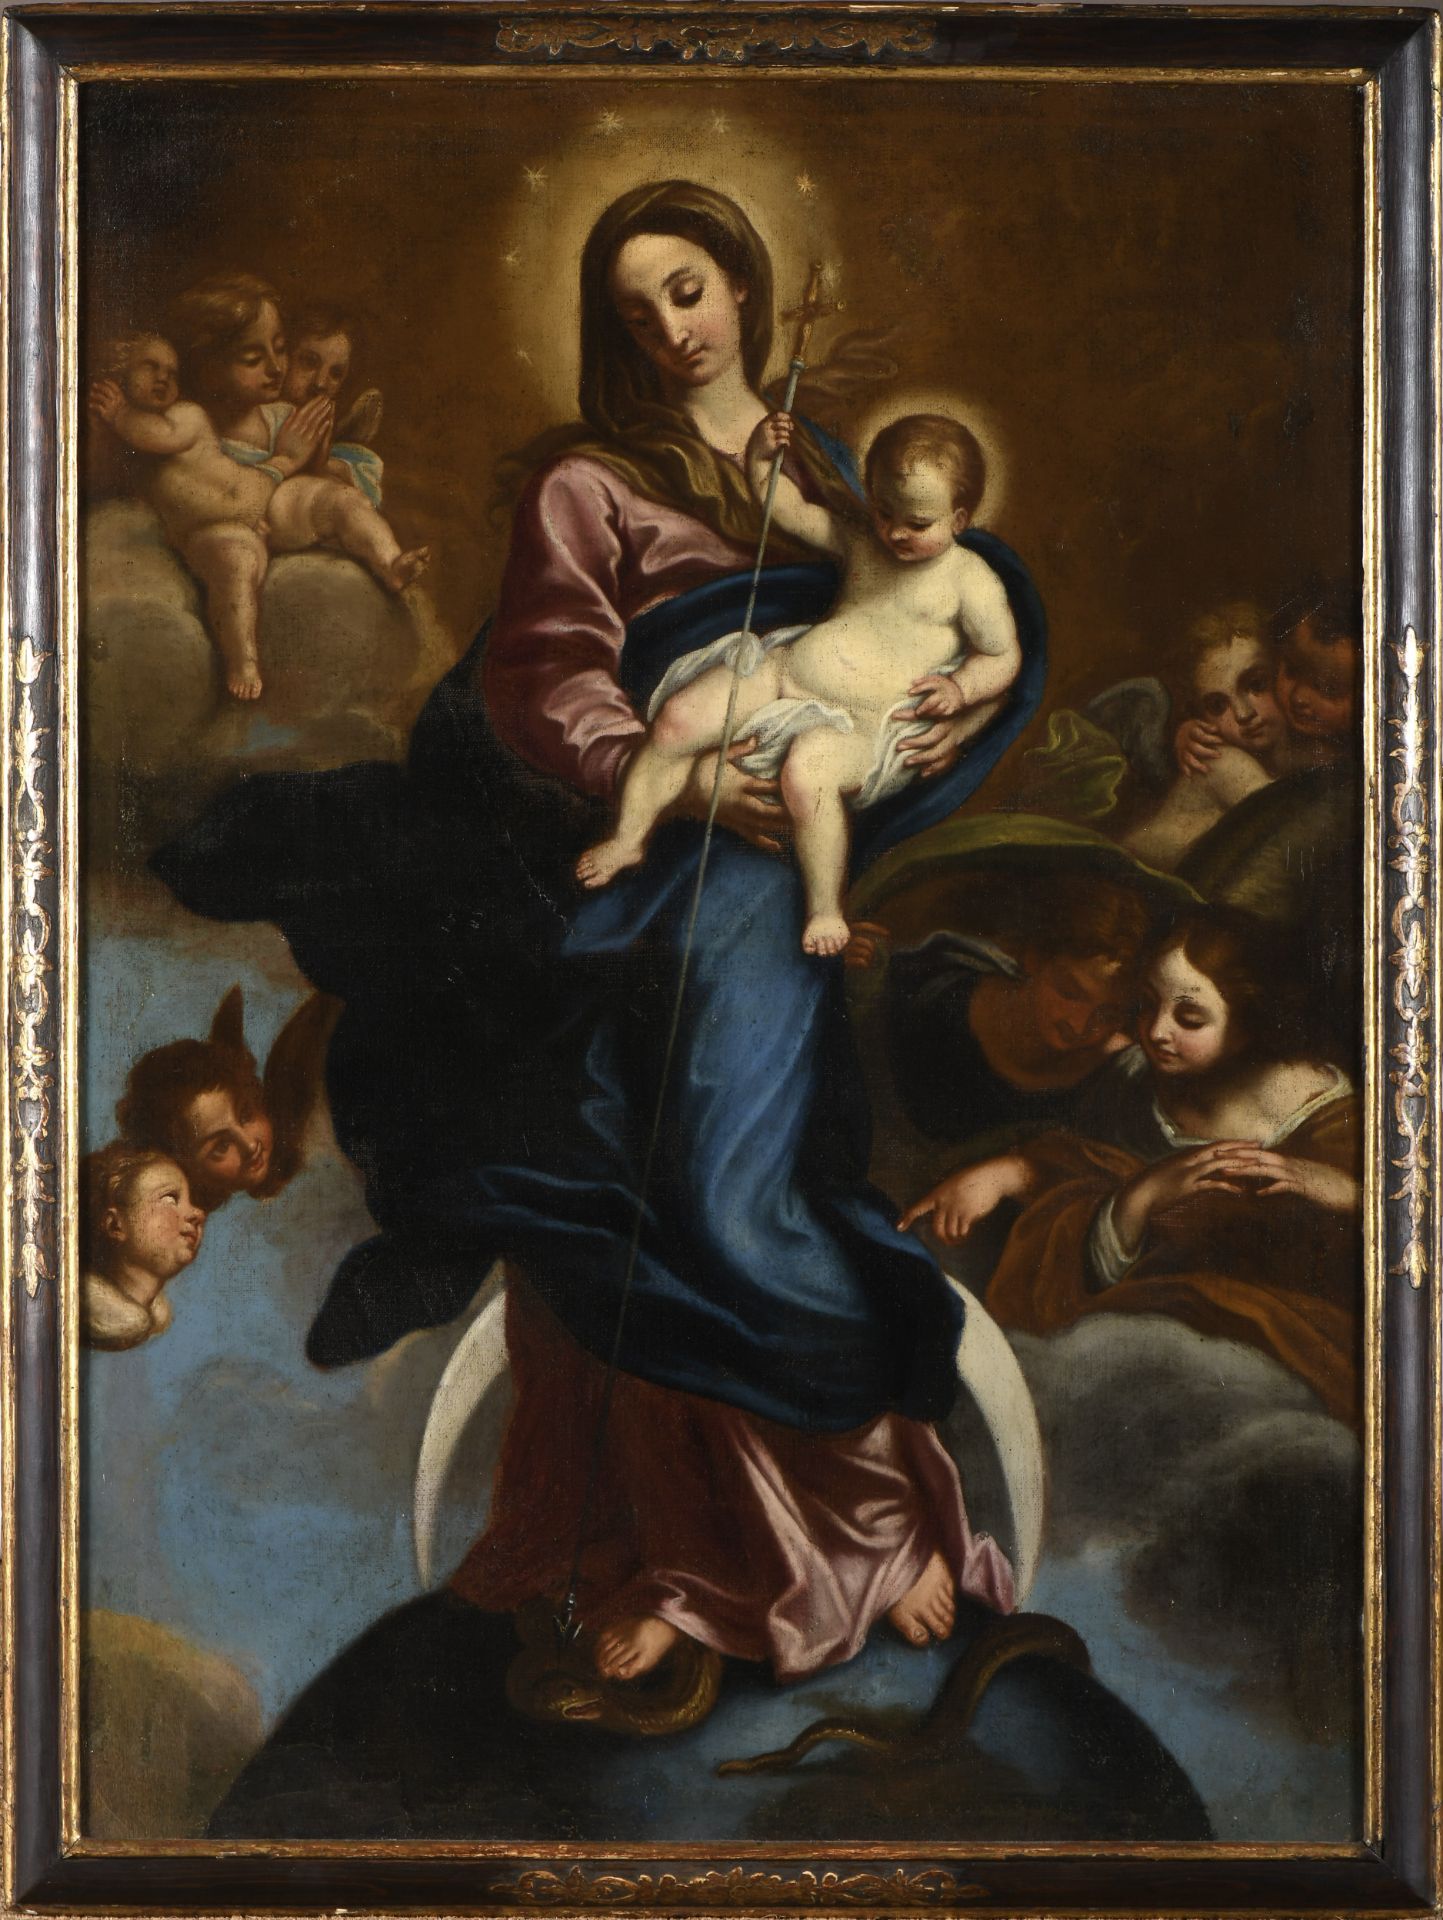 Our Lady with the Child Jesus surrounded by angels and cherubs